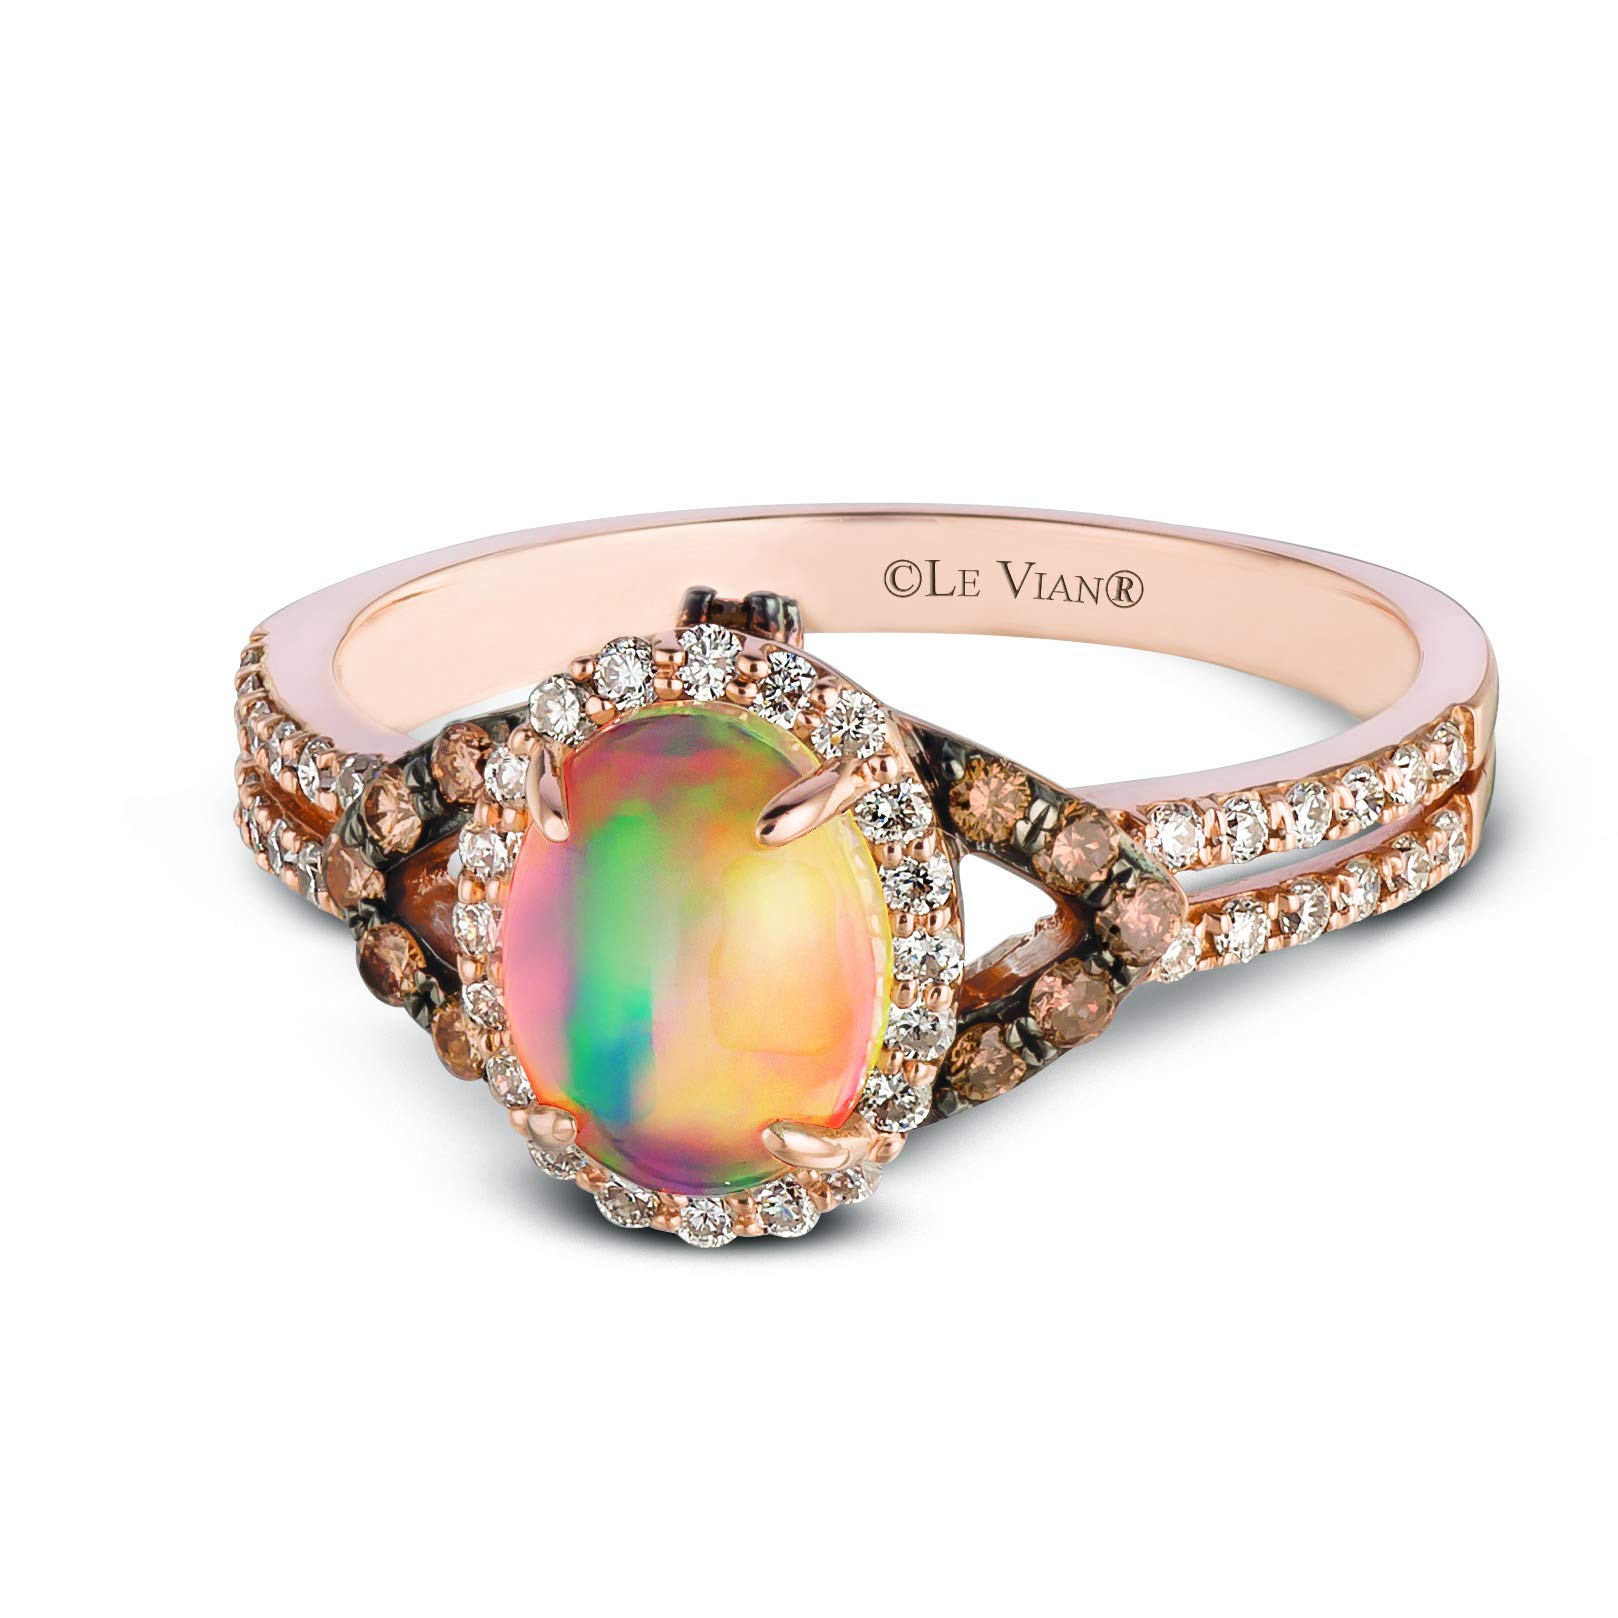 2/5 Carat Diamond and 3/5 Carat Opal Cabochon Oval Halo Split Shank Ring for Women in 14k Rose Gold (Fancy Brown/H-I, SI1-SI2, cttw) Promise Anniversary Ring Size 5 to 12.5 by LeVian